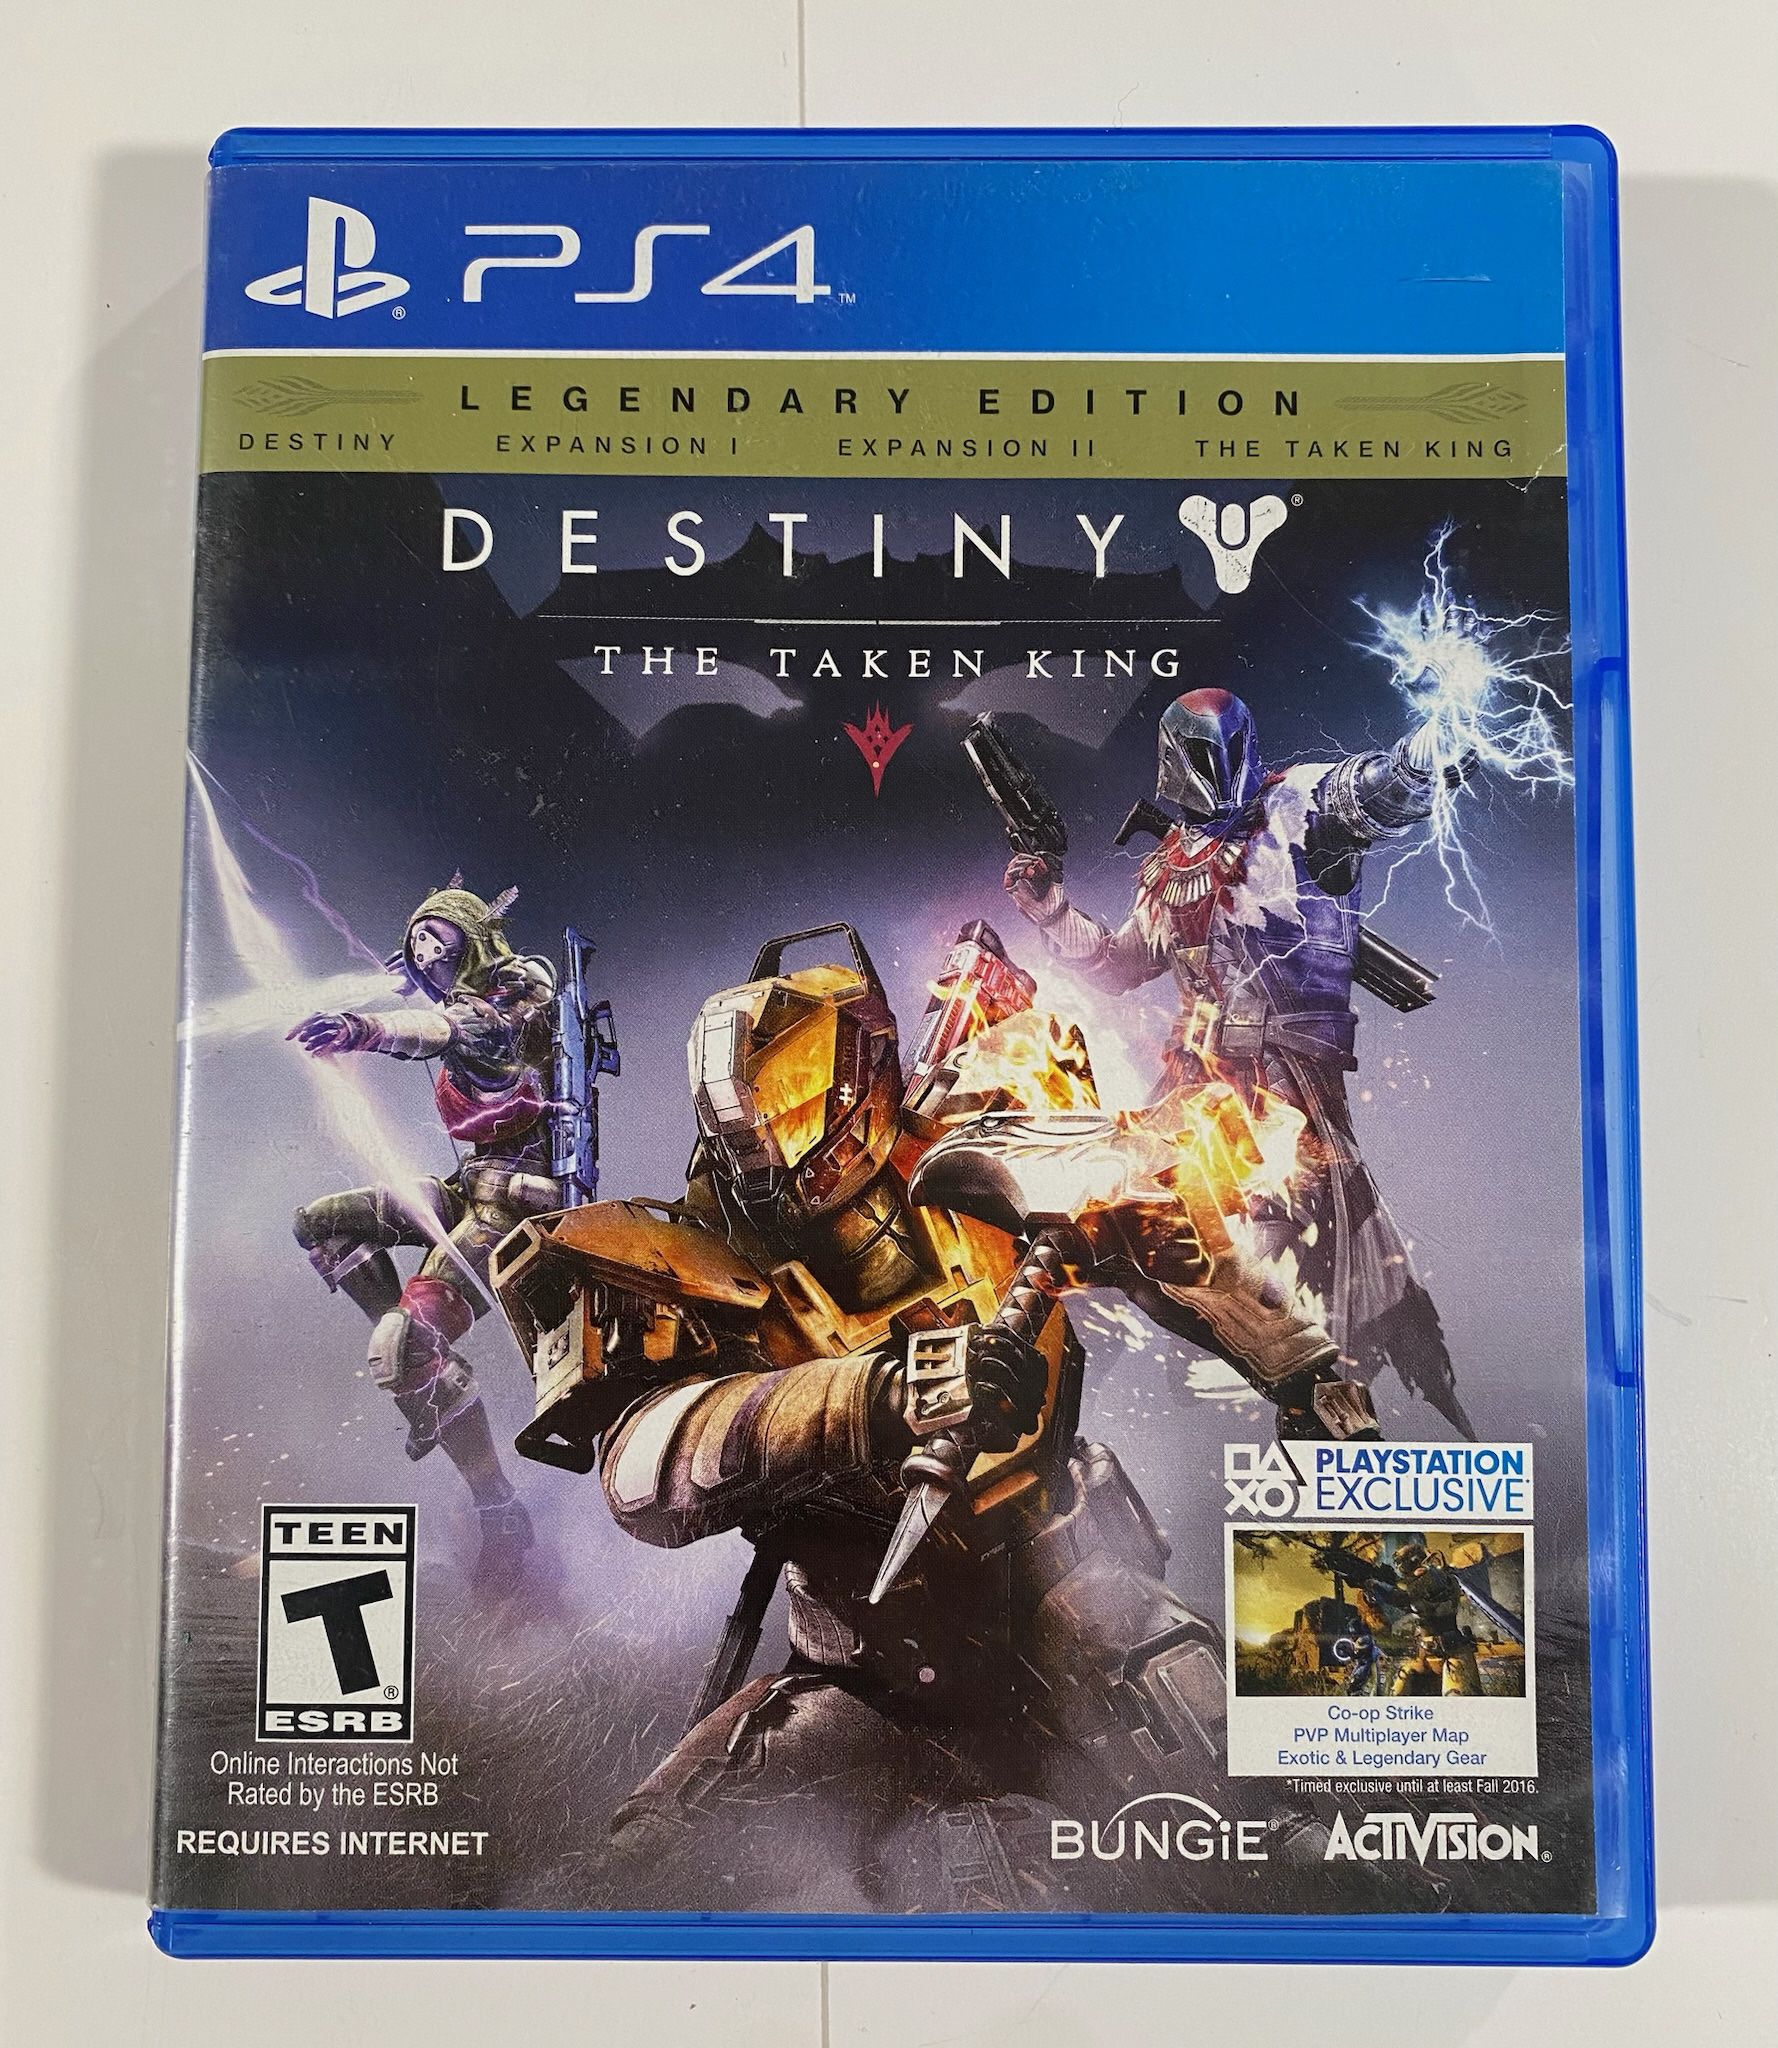 hældning klarhed Legende DESTINY 2 THE TAKEN KING LEGENDARY COLLECTION SONY PLAYSTATION 4 PS4 VIDEO  GAME COMPLETE W/ MANUAL CIB for Sale in Agua Dulce, CA - OfferUp